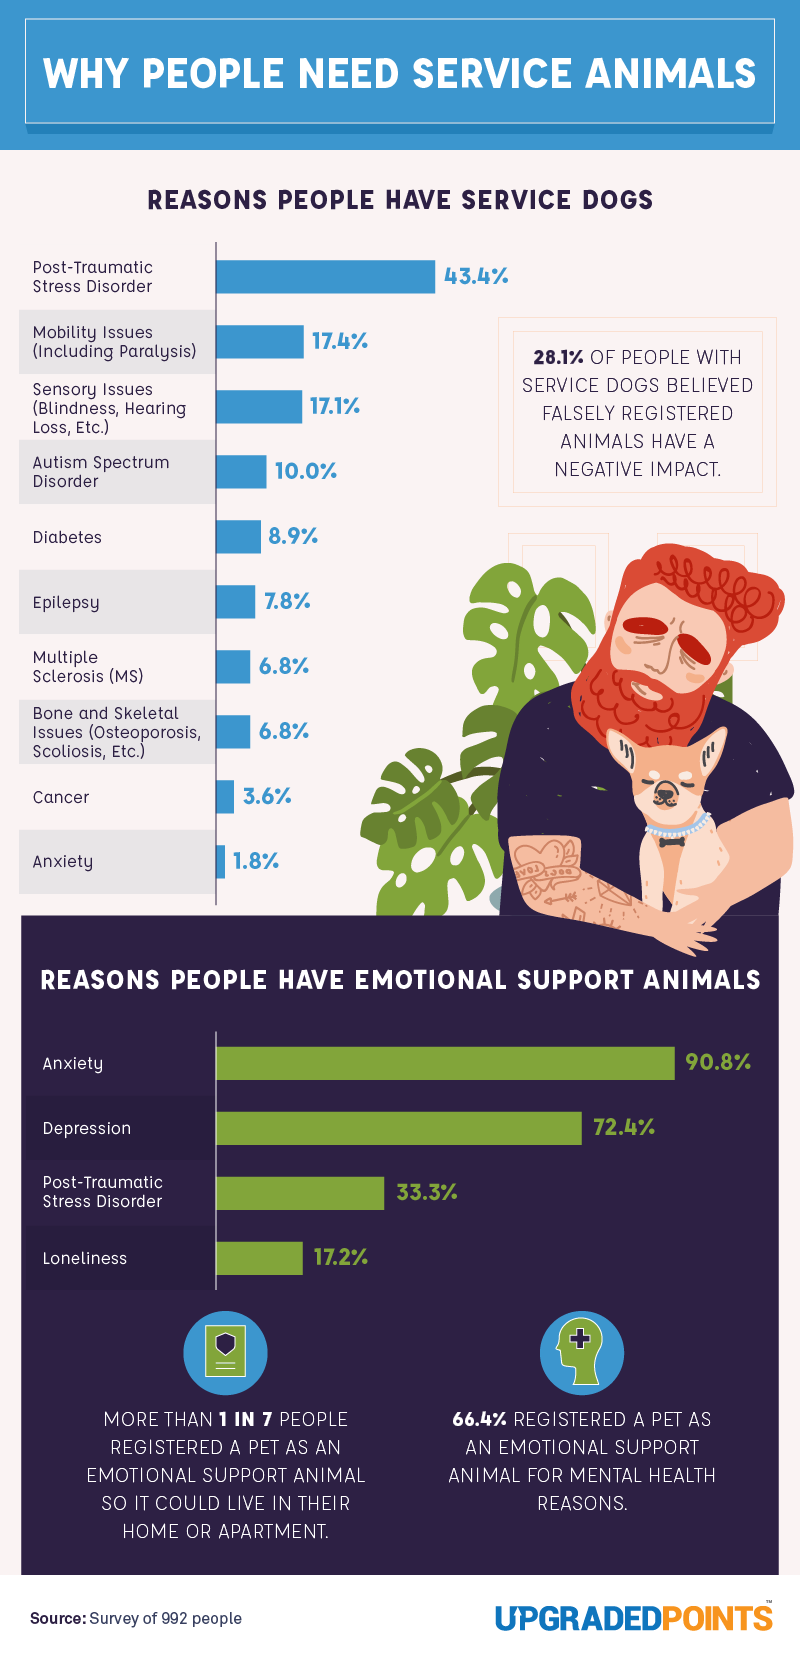 Why people need service animals